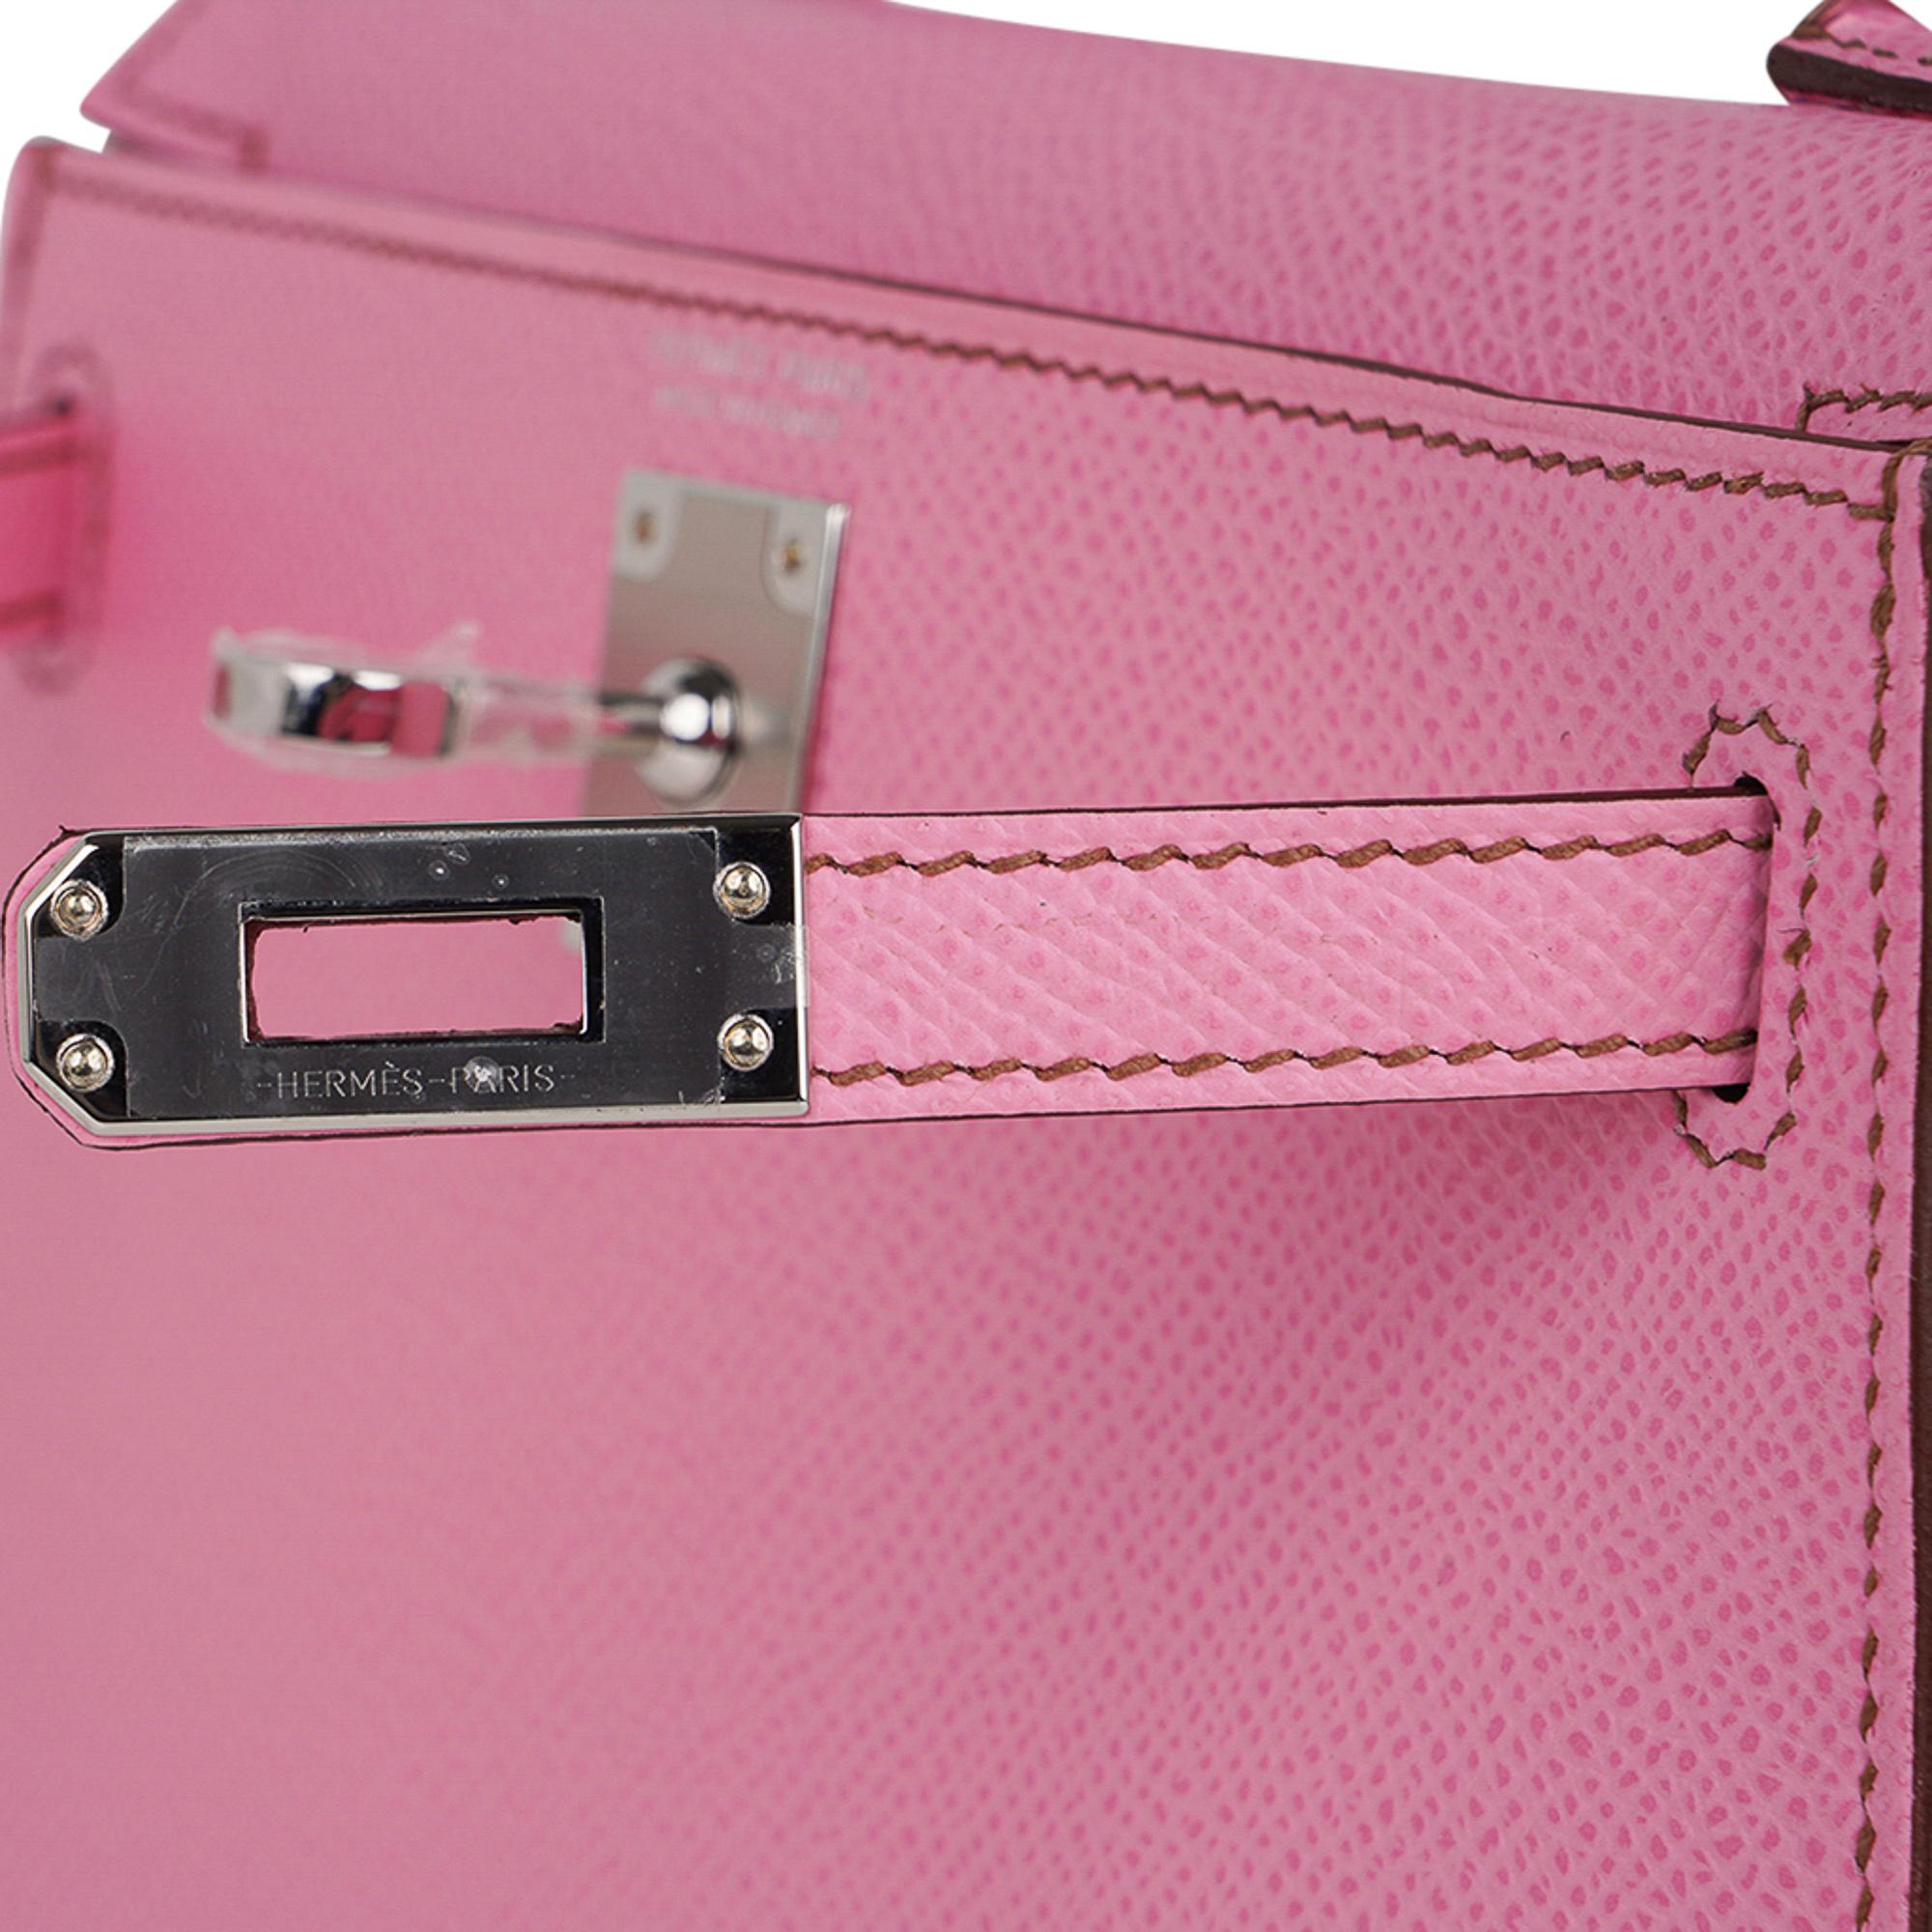 Mightychic offers a guaranteed authentic Hermes Kelly 20 Mini Sellier bag featured in coveted Bubblegum 5P Pink.  
Epsom leather accentuated with Palladium hardware.
Comes with signature Hermes box, shoulder strap, and sleeper.
Please see the